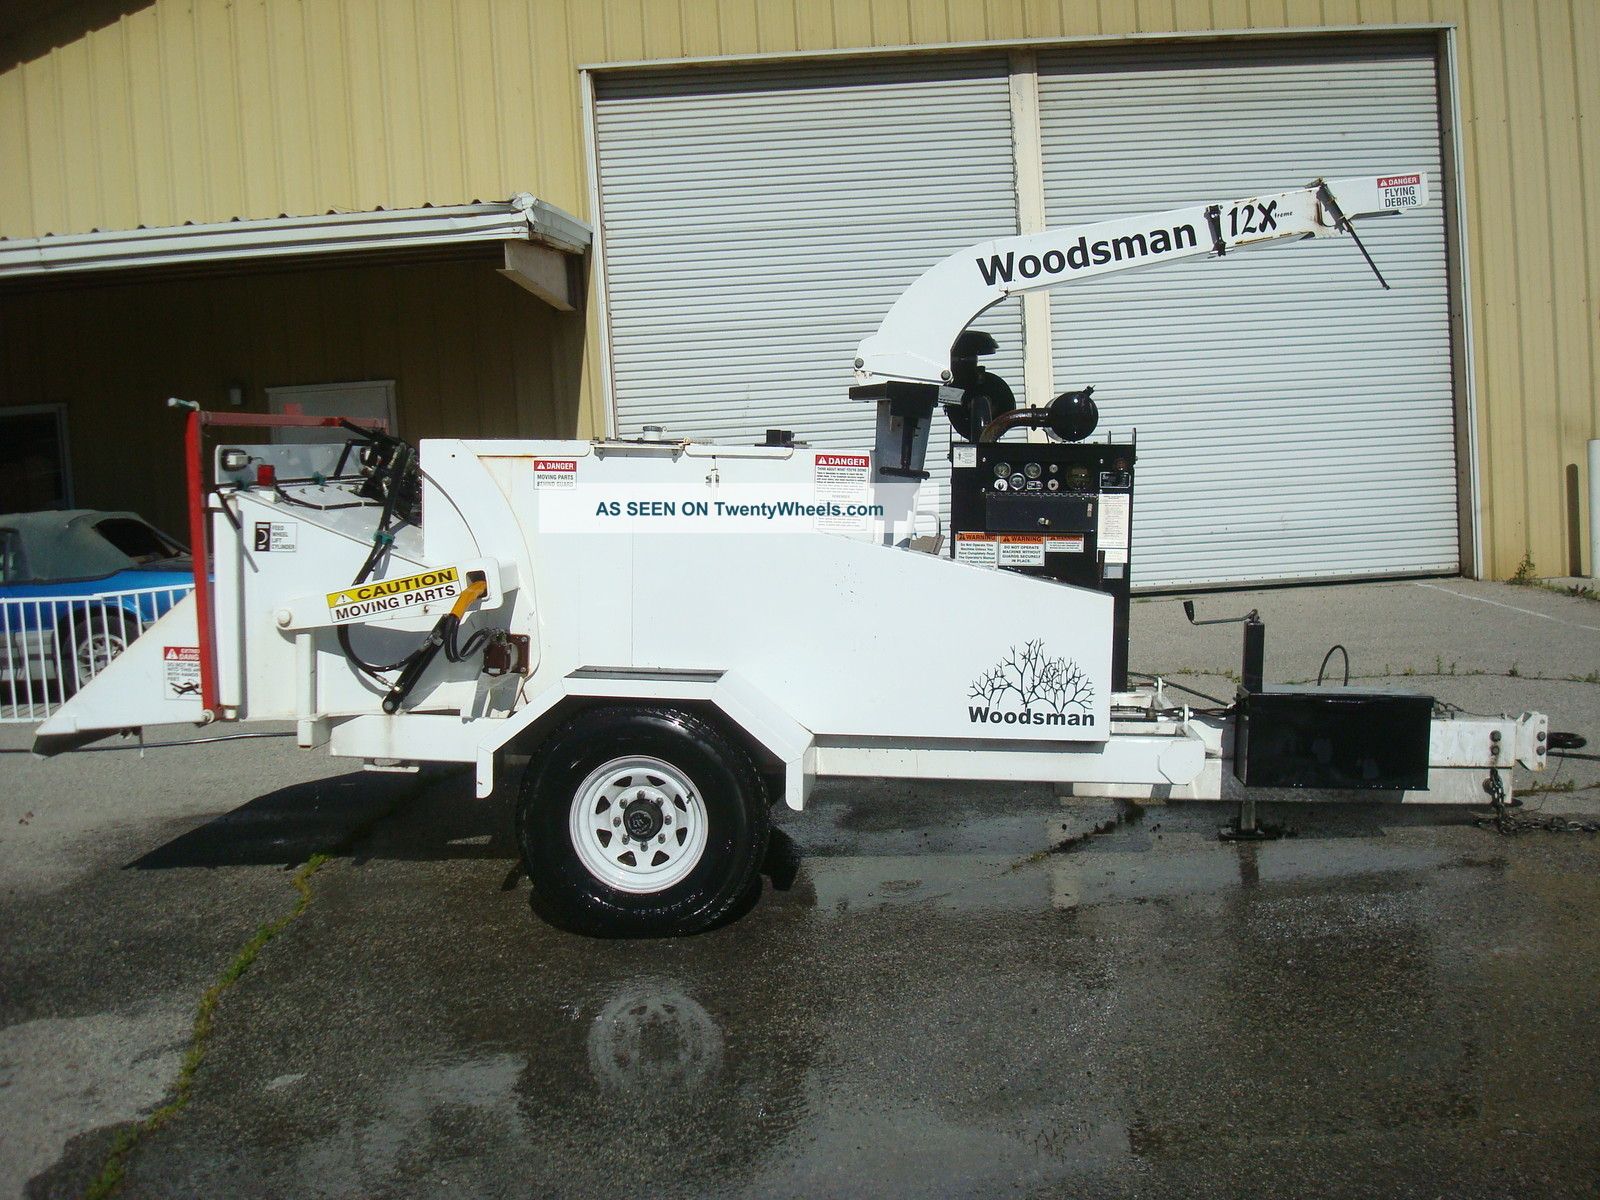 Woodman 12x 2007 Jd Diesel Only 846 Hours Very Ex California County Wood Chippers & Stump Grinders photo